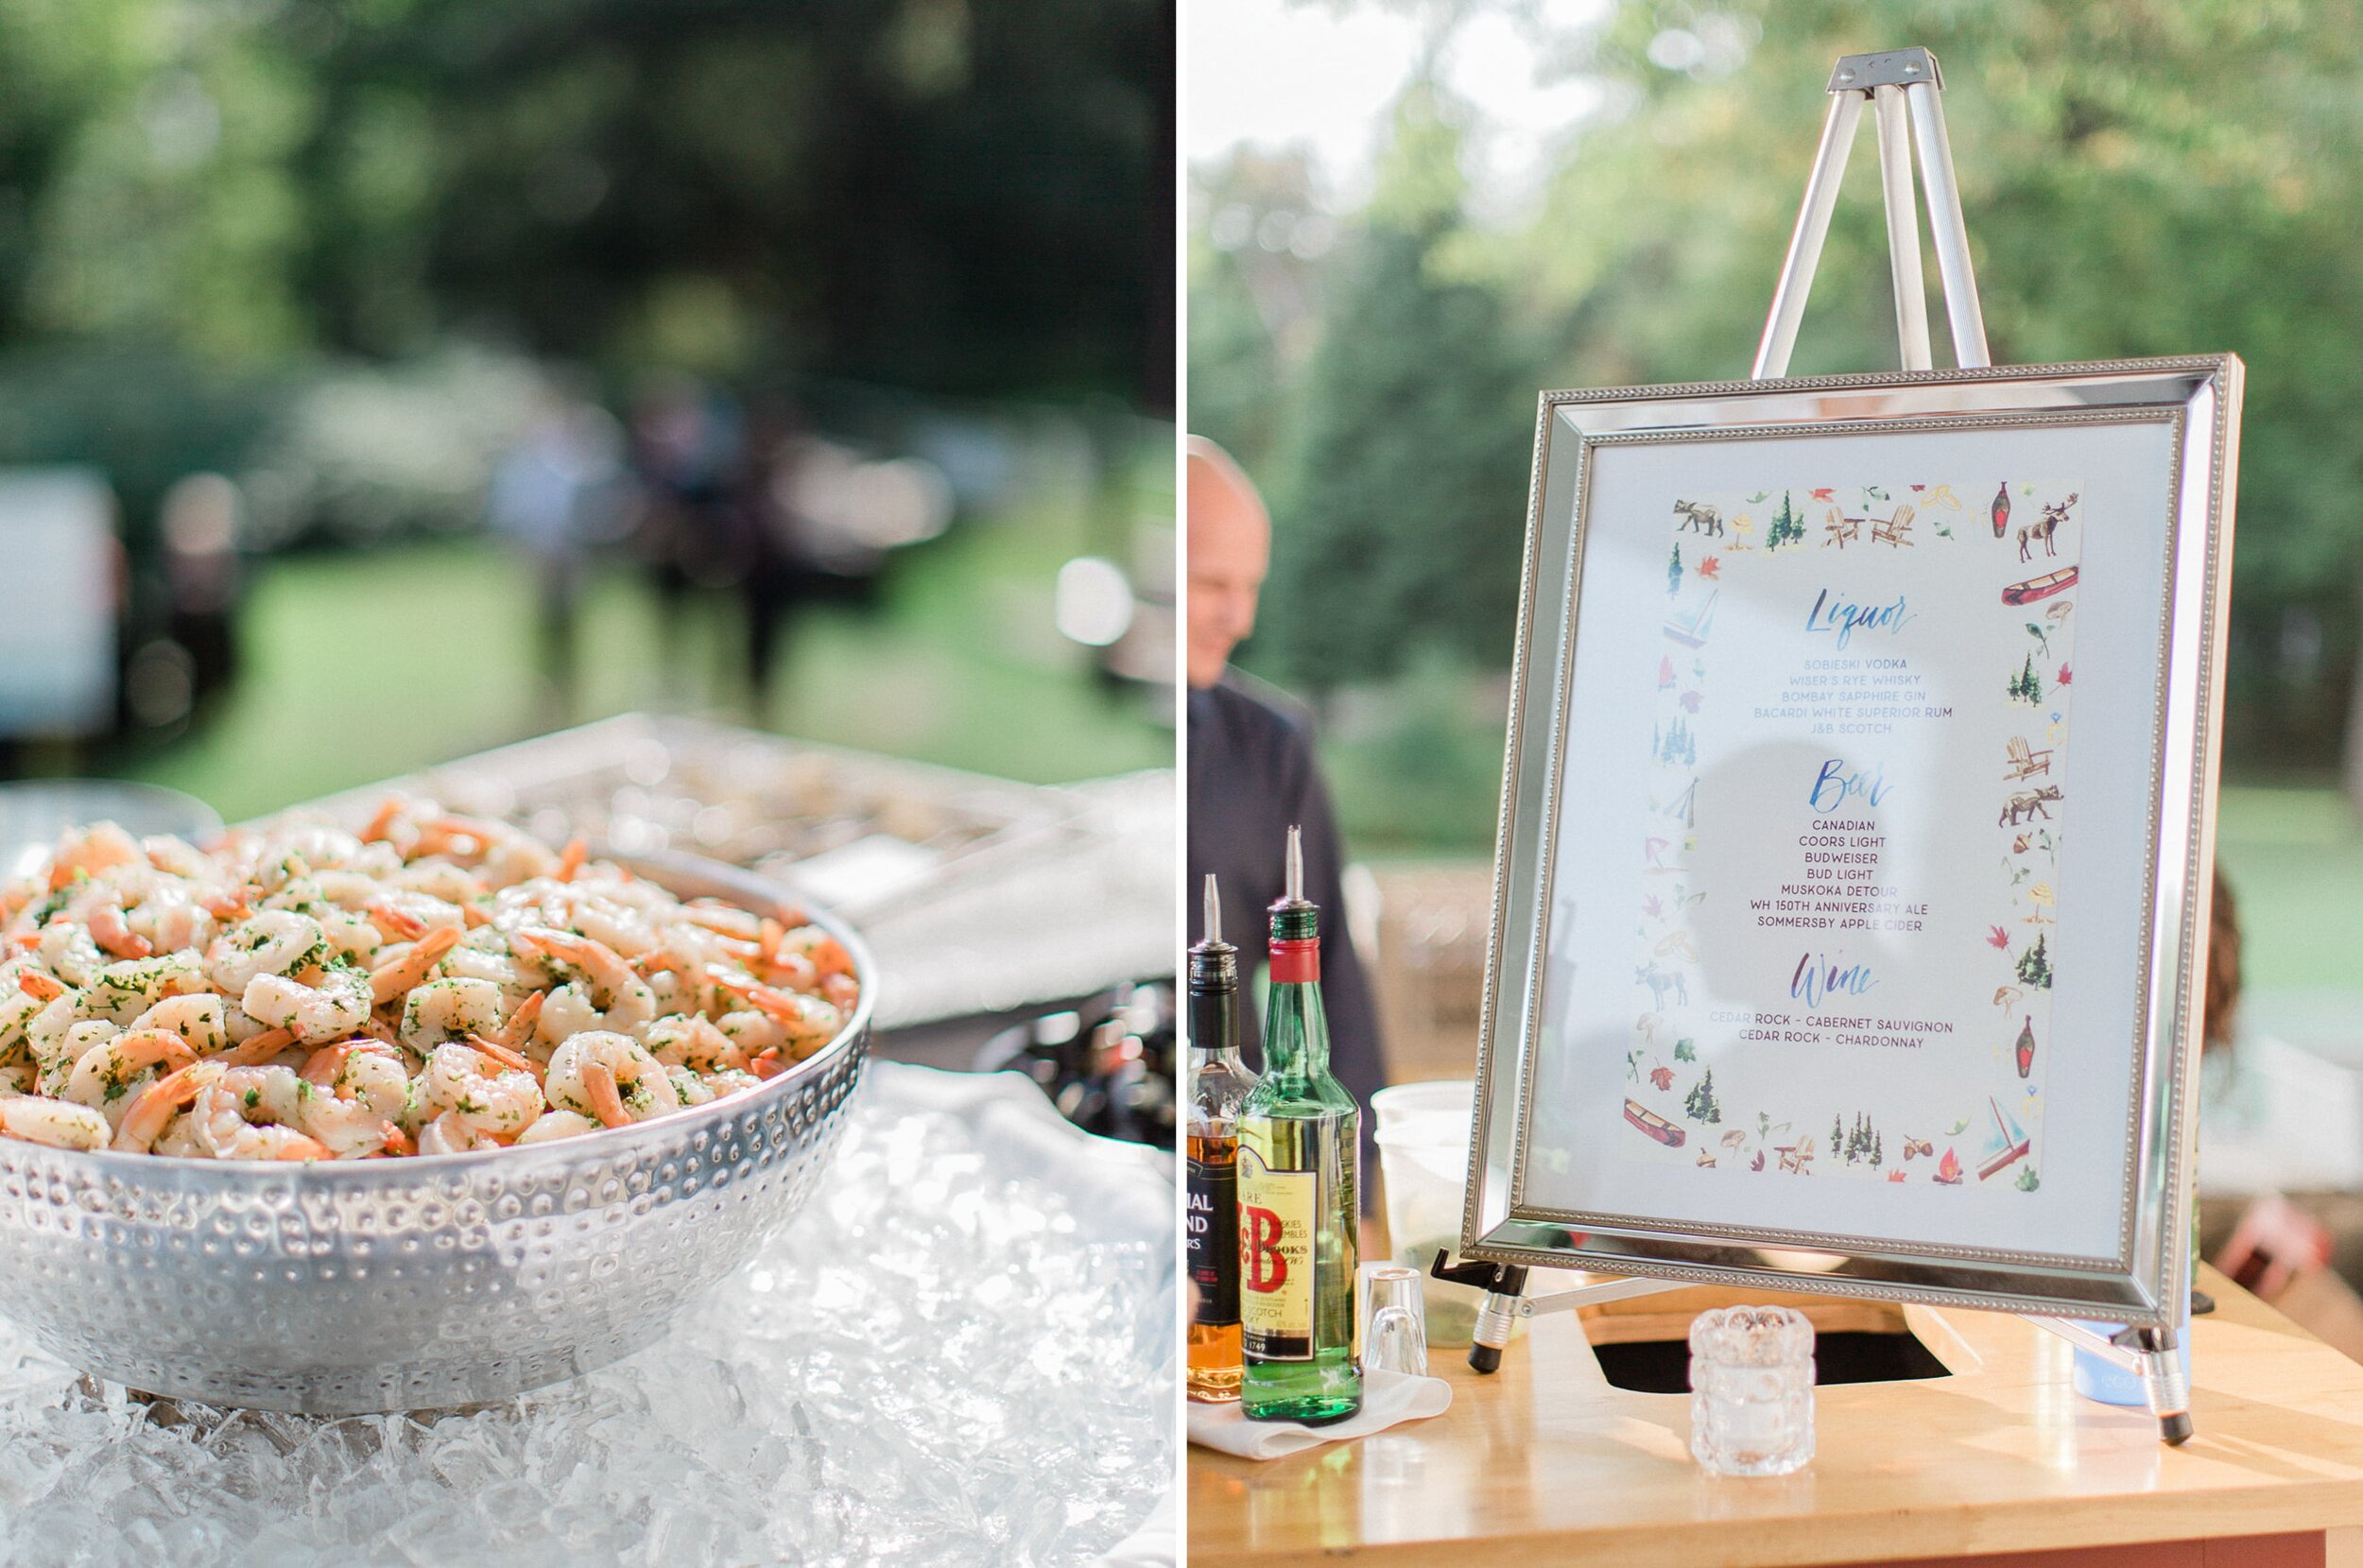 cocktail hour details from an outdoor garden party wedding at windermere house muskoka